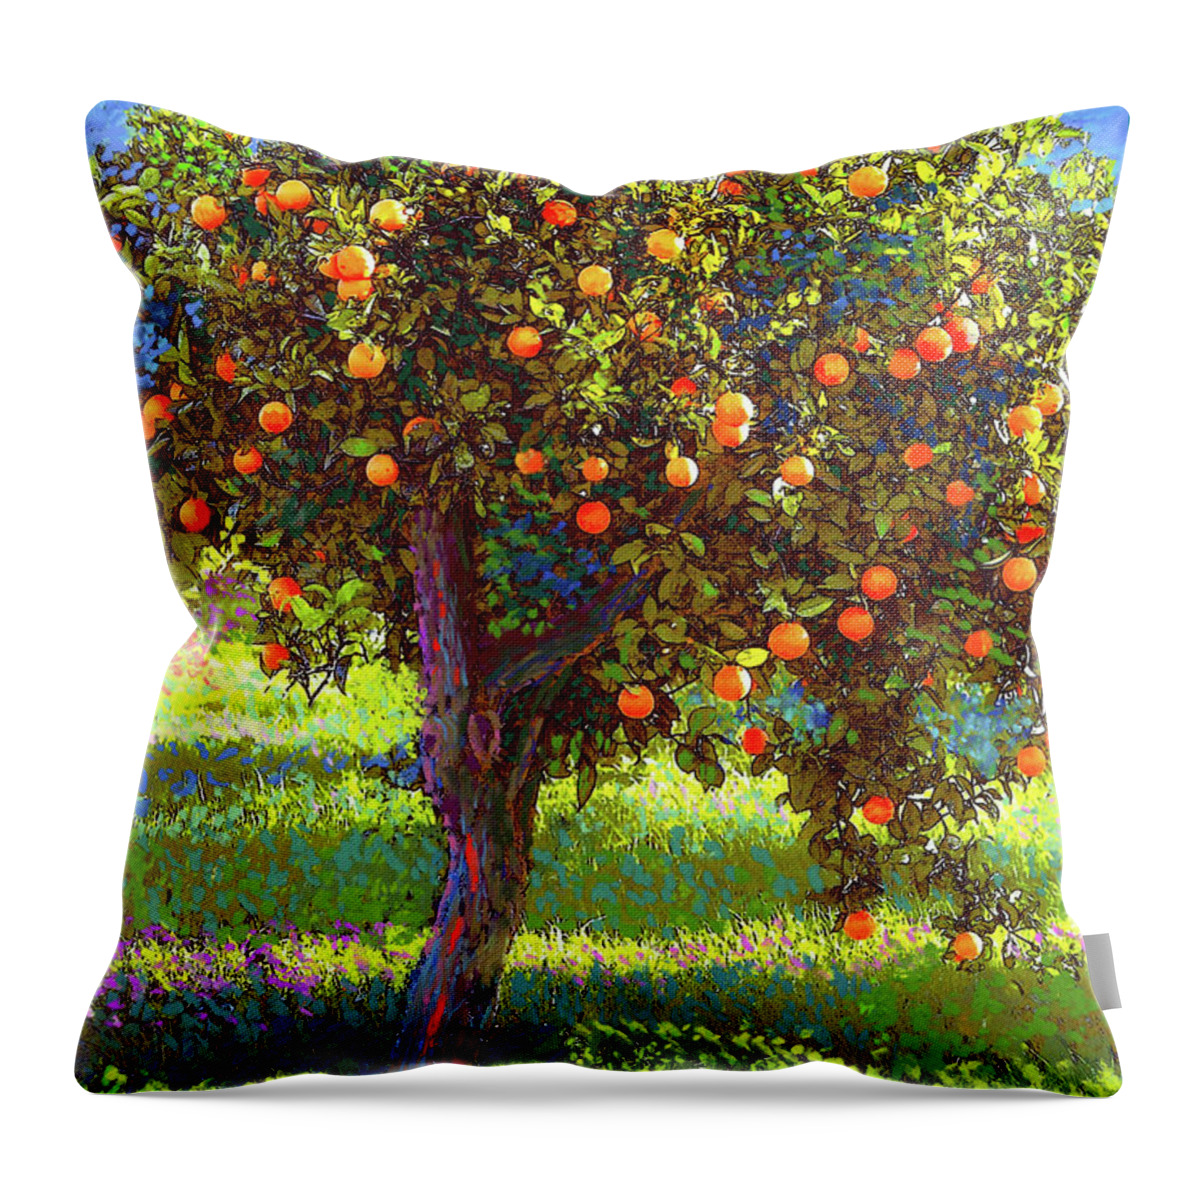 Landscape Throw Pillow featuring the painting Orange Fruit Tree by Jane Small